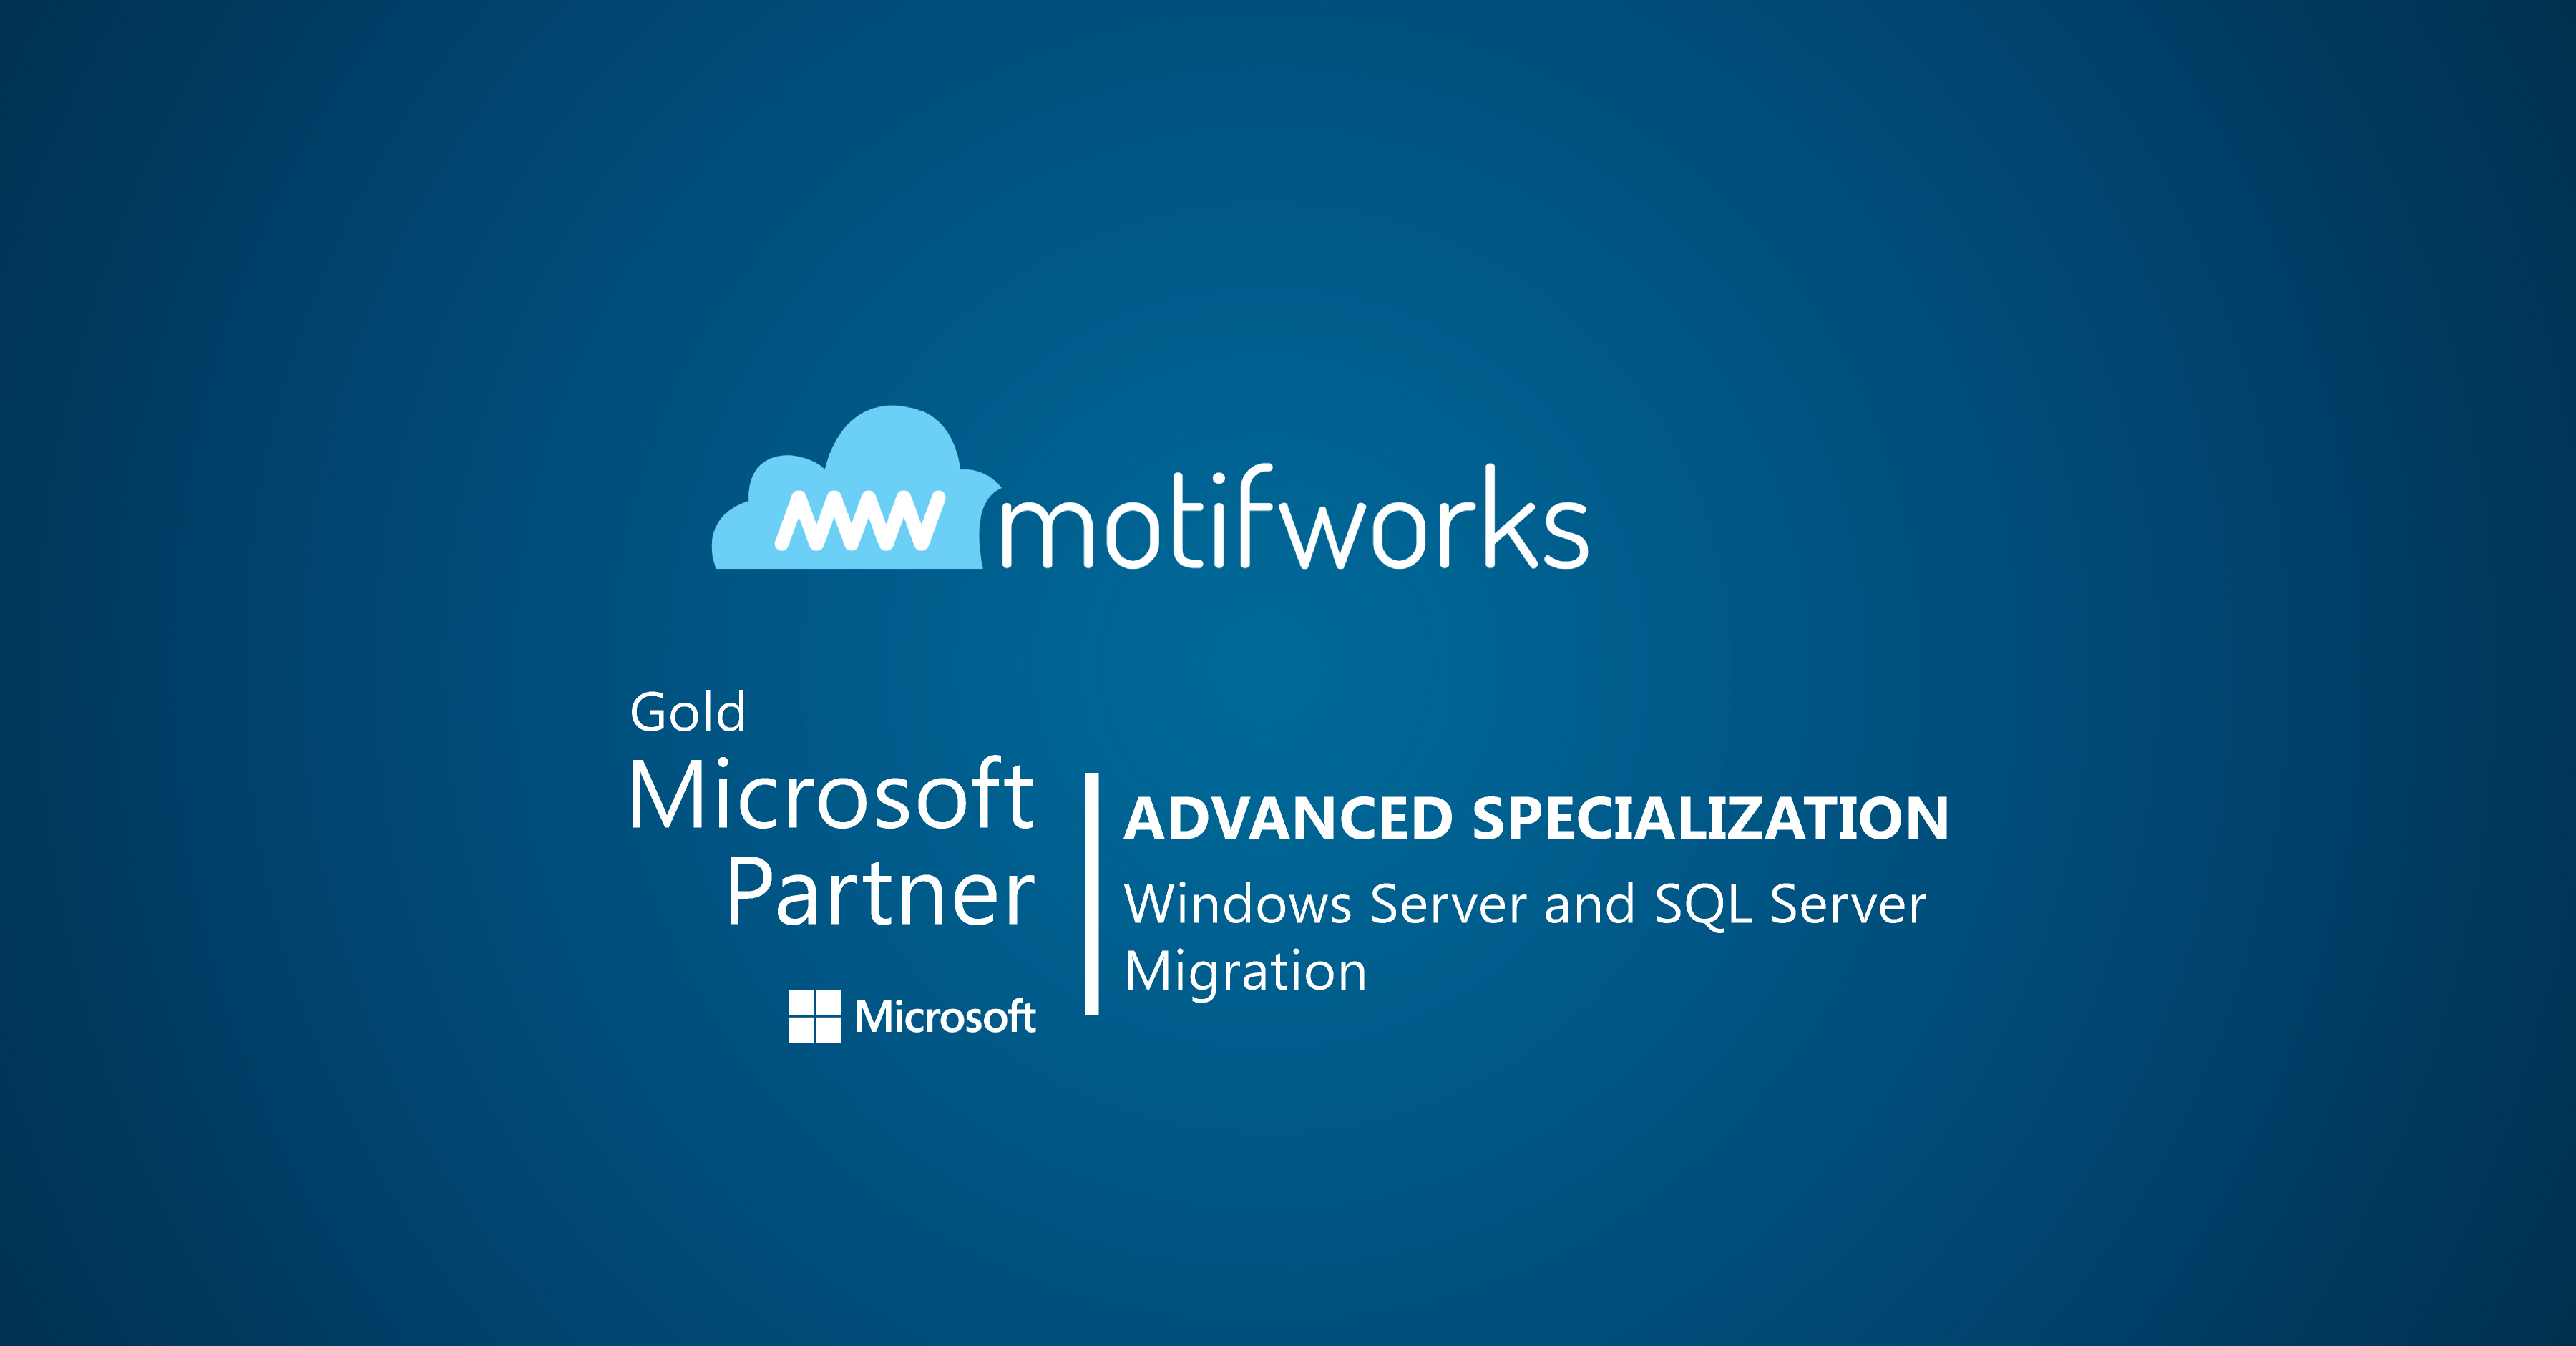 Featured Image - Motifworks Earns the AMP Advanced Specialization for Windows Server and SQL Server Migration